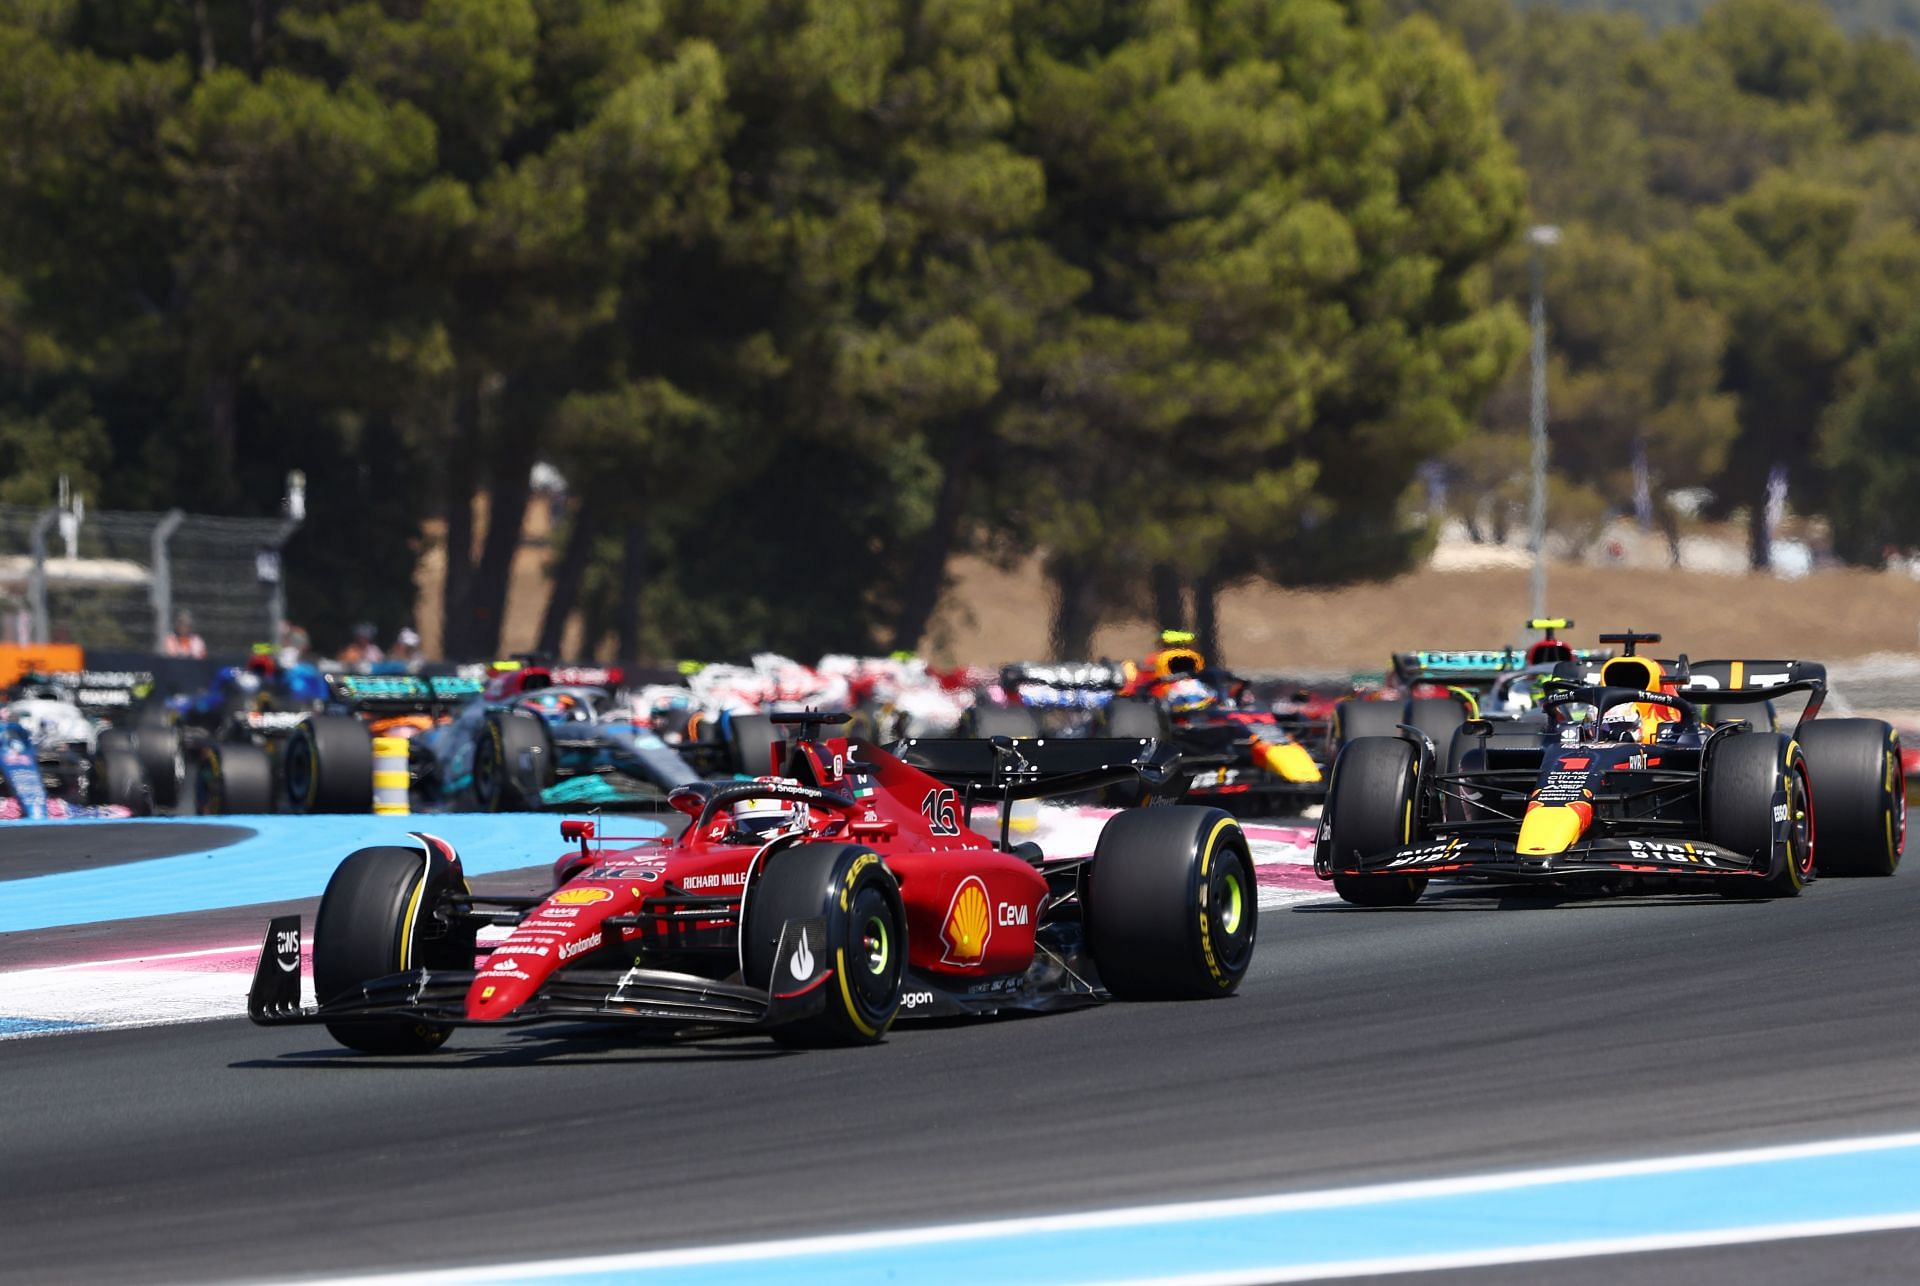 The new set of F1 regulations has not delivered on its promises